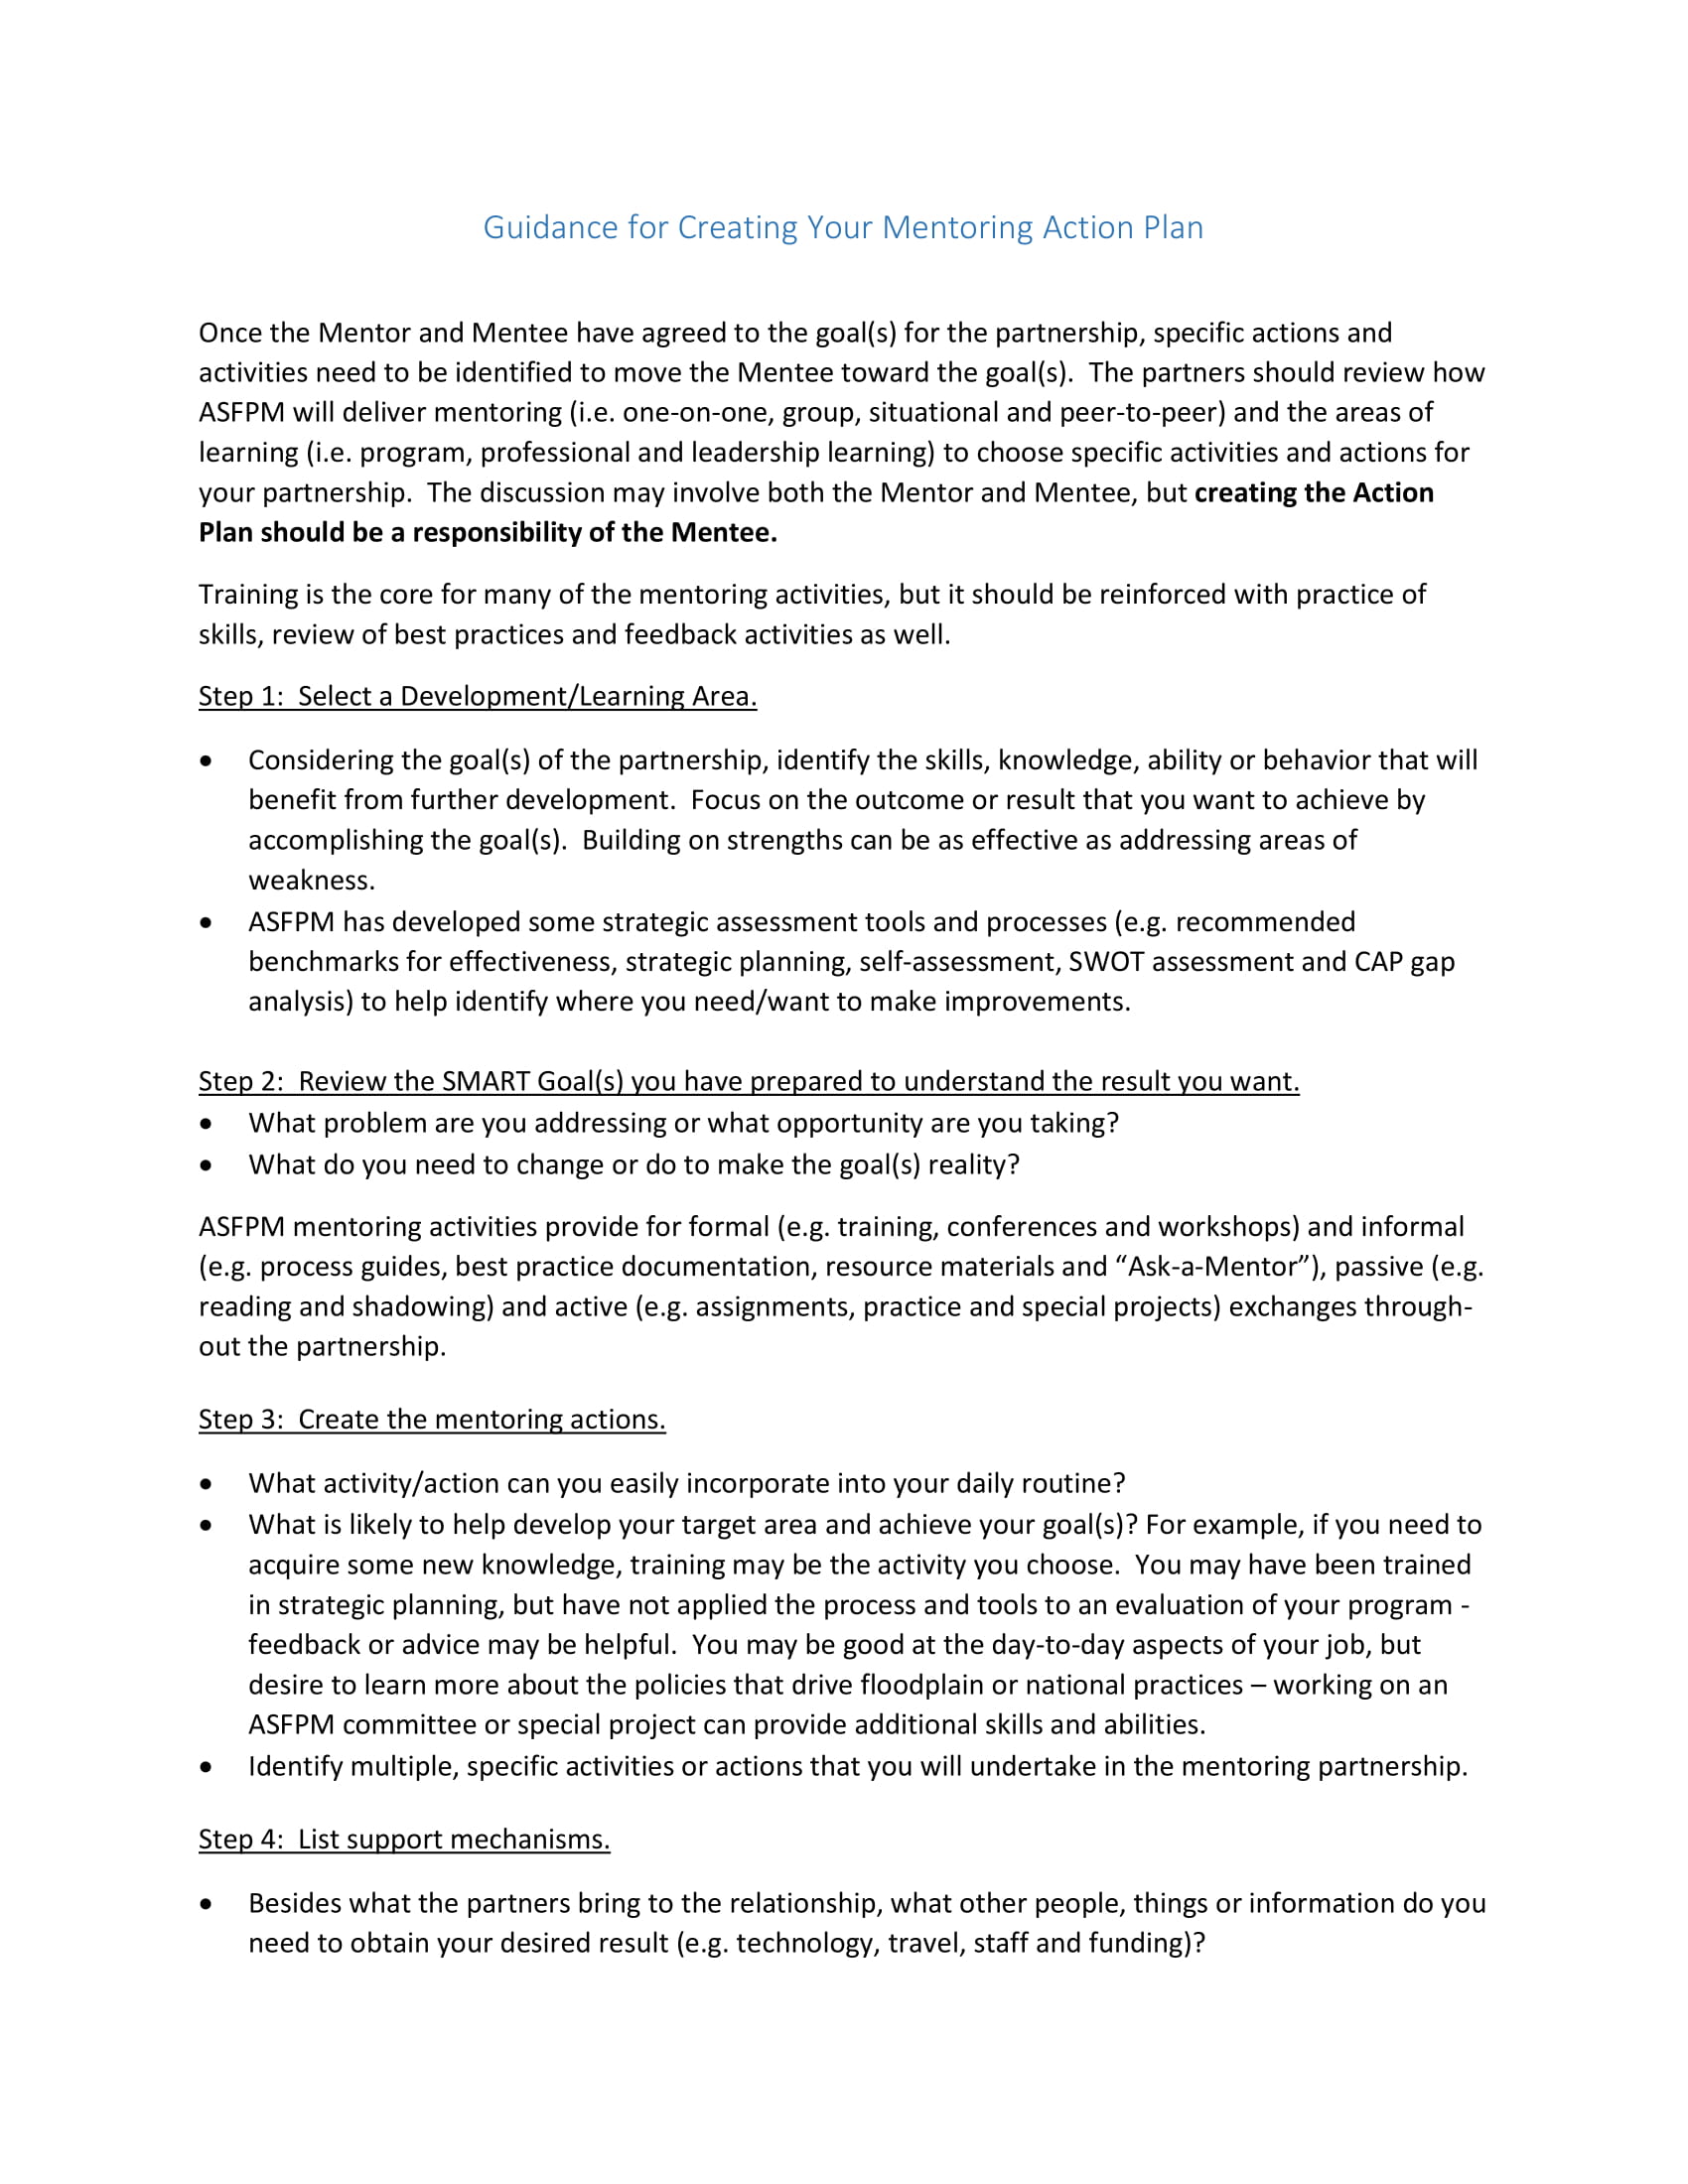 mentoring action plan guidelines example 12